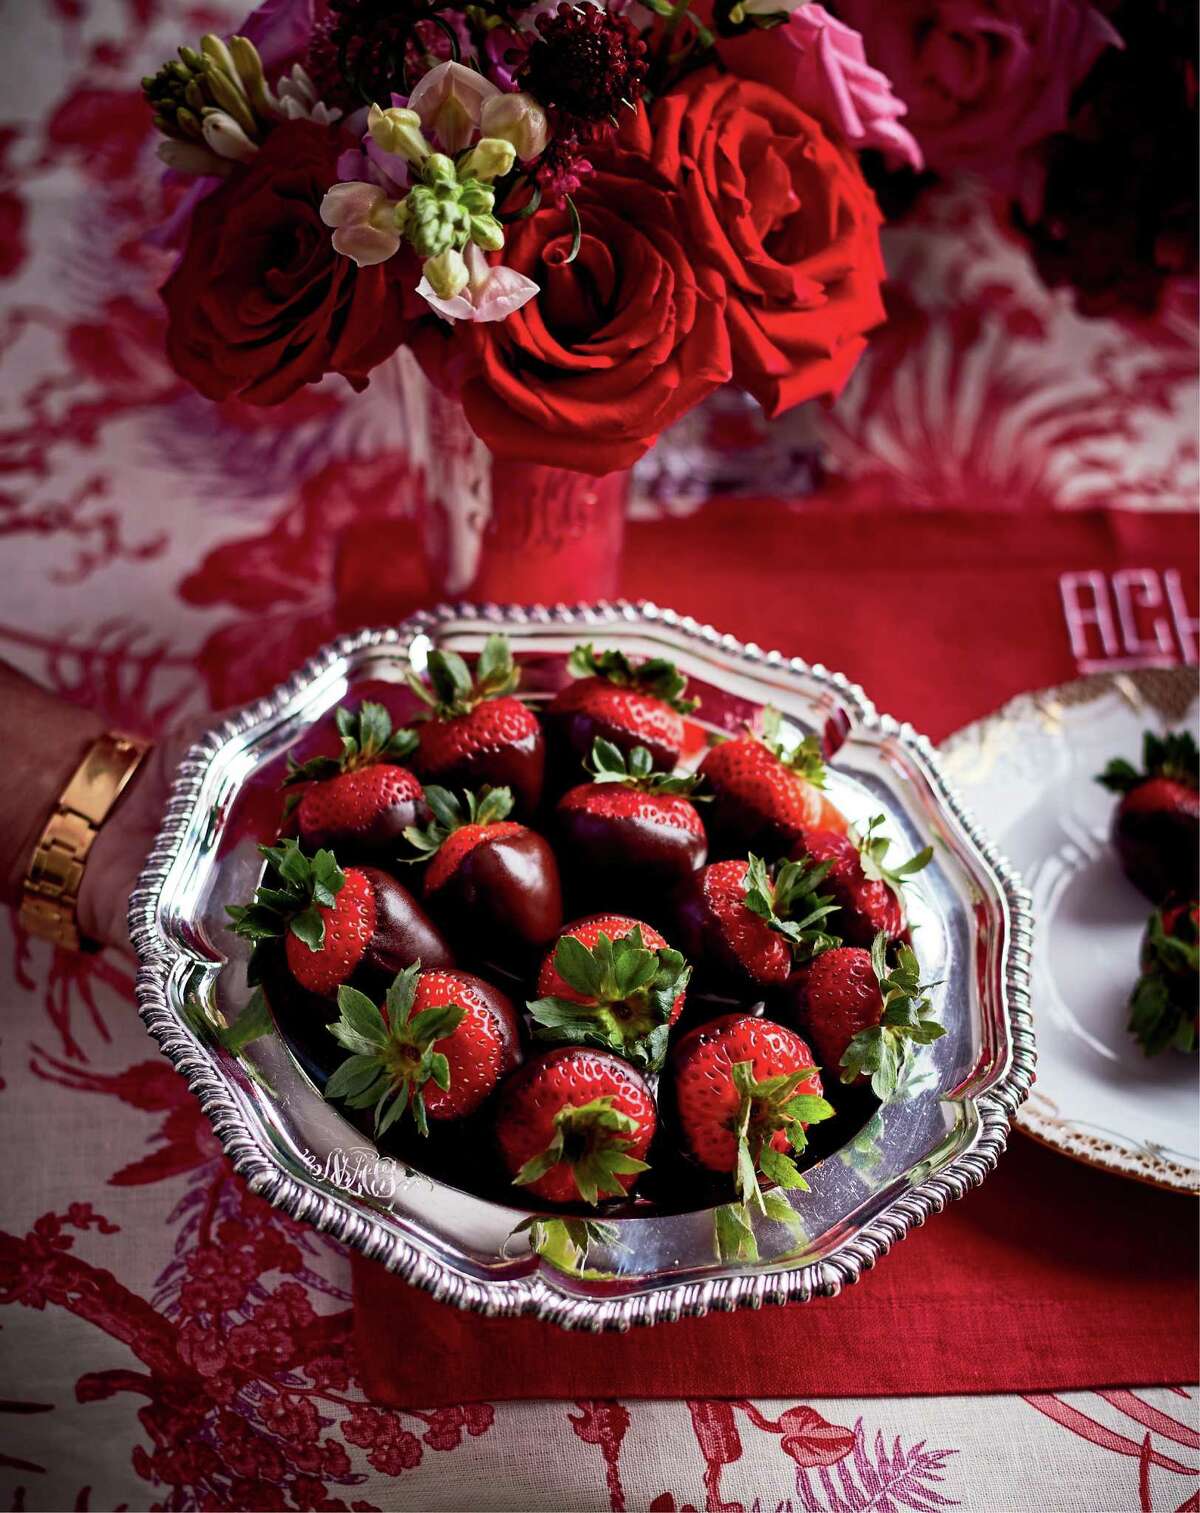 A Valentine’s Day treat from “The Art of the Host: Recipes and Rules for Flawless Entertaining,” by Alex Hitz, Rizzoli. Photographs by Iain Bagwell.